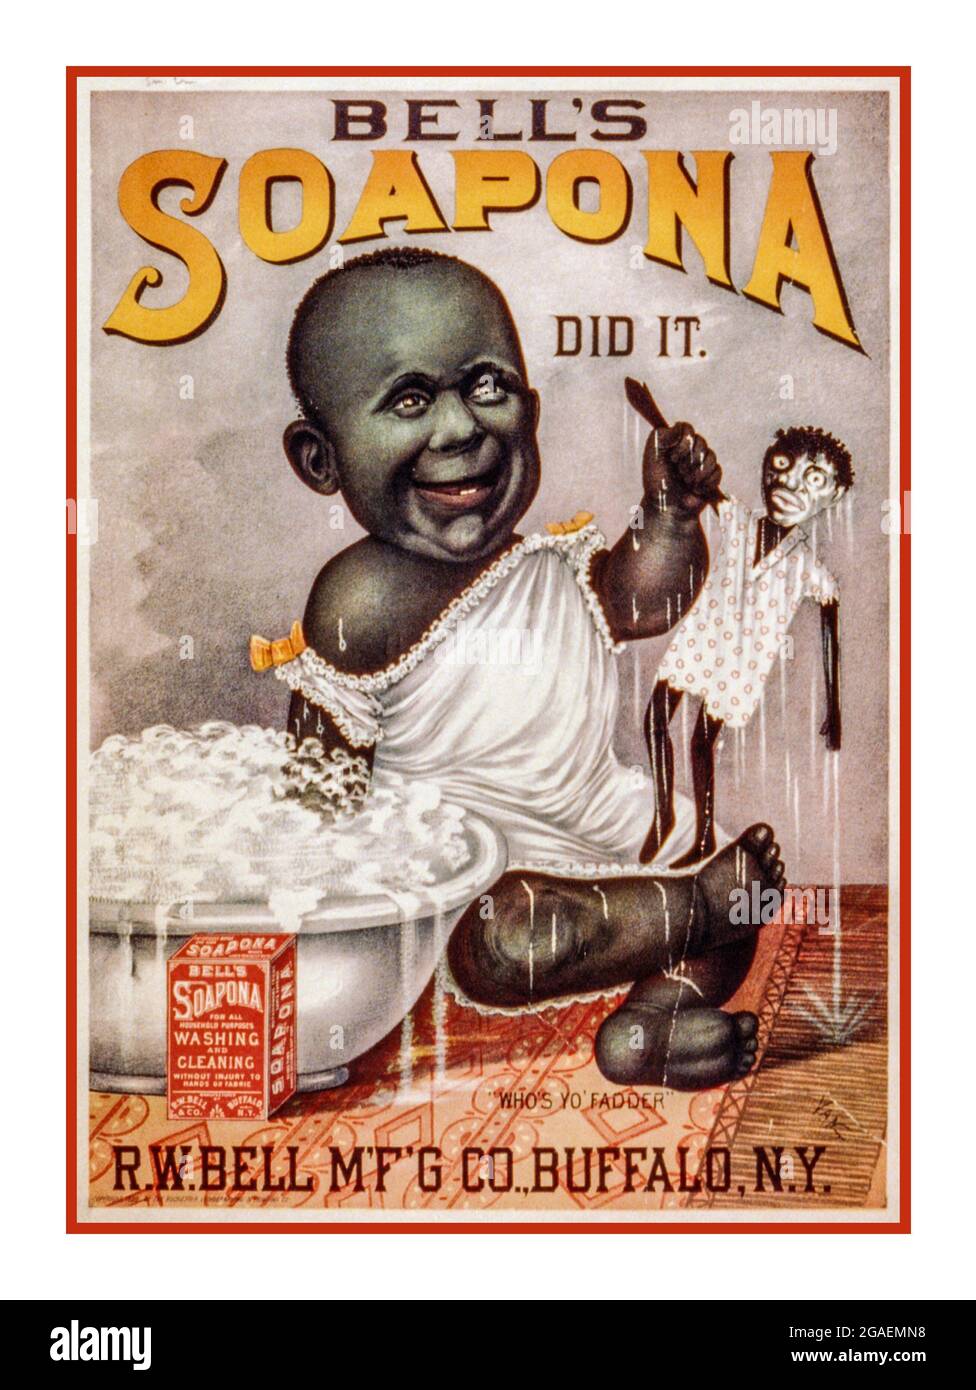 RACIST non PC Vintage American Advertisement for Soapona 